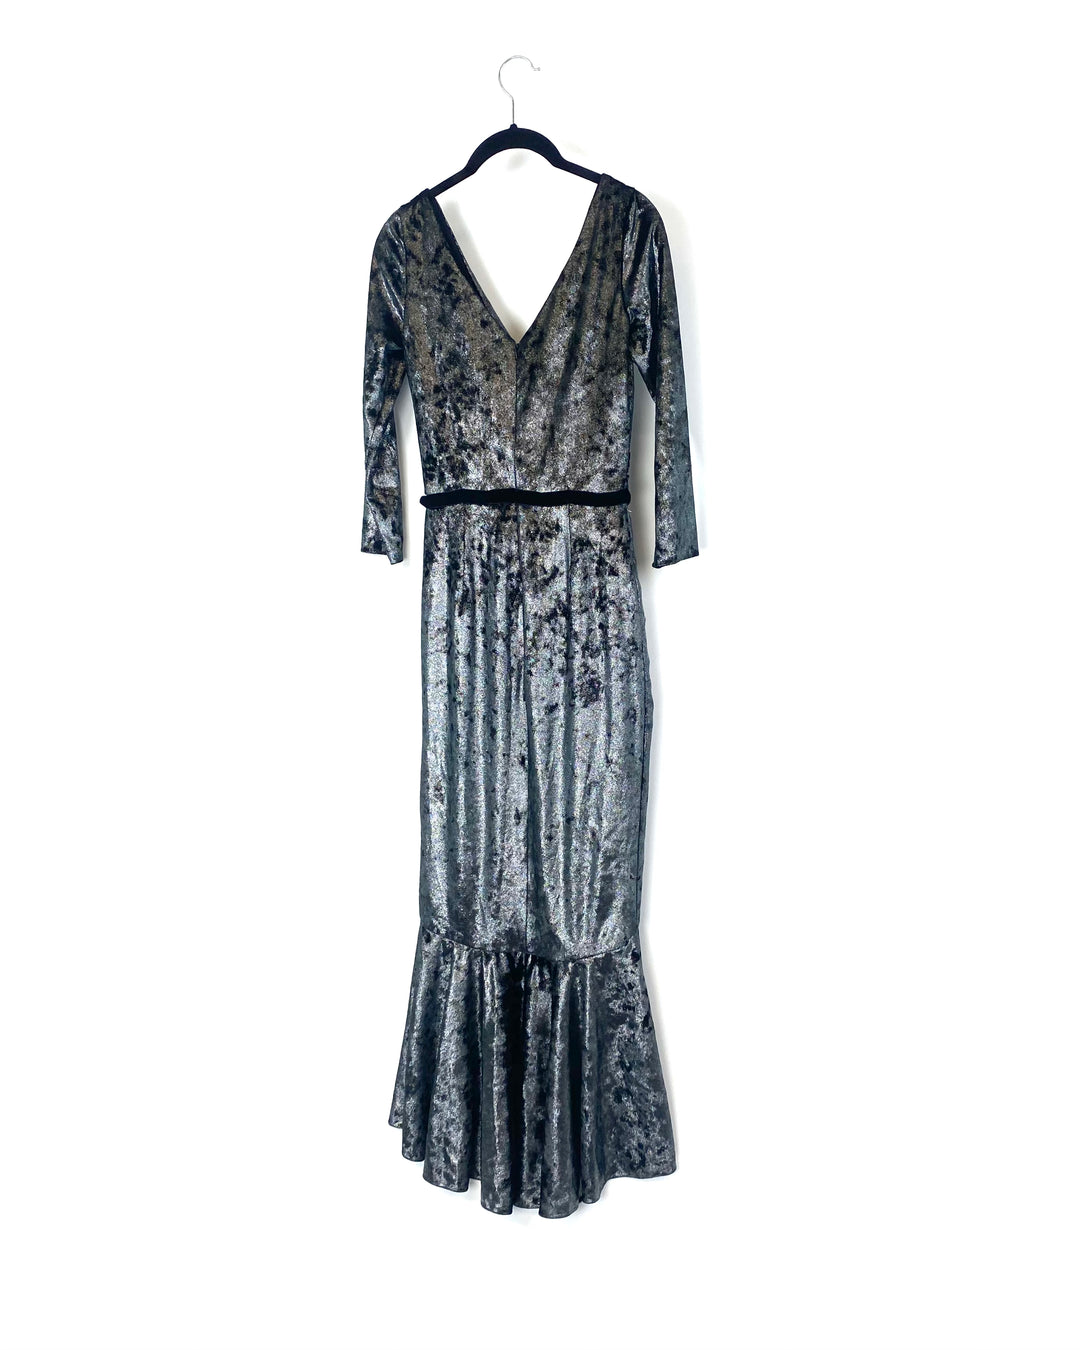 Black and Silver Metallic Velour Gown - Extra Small